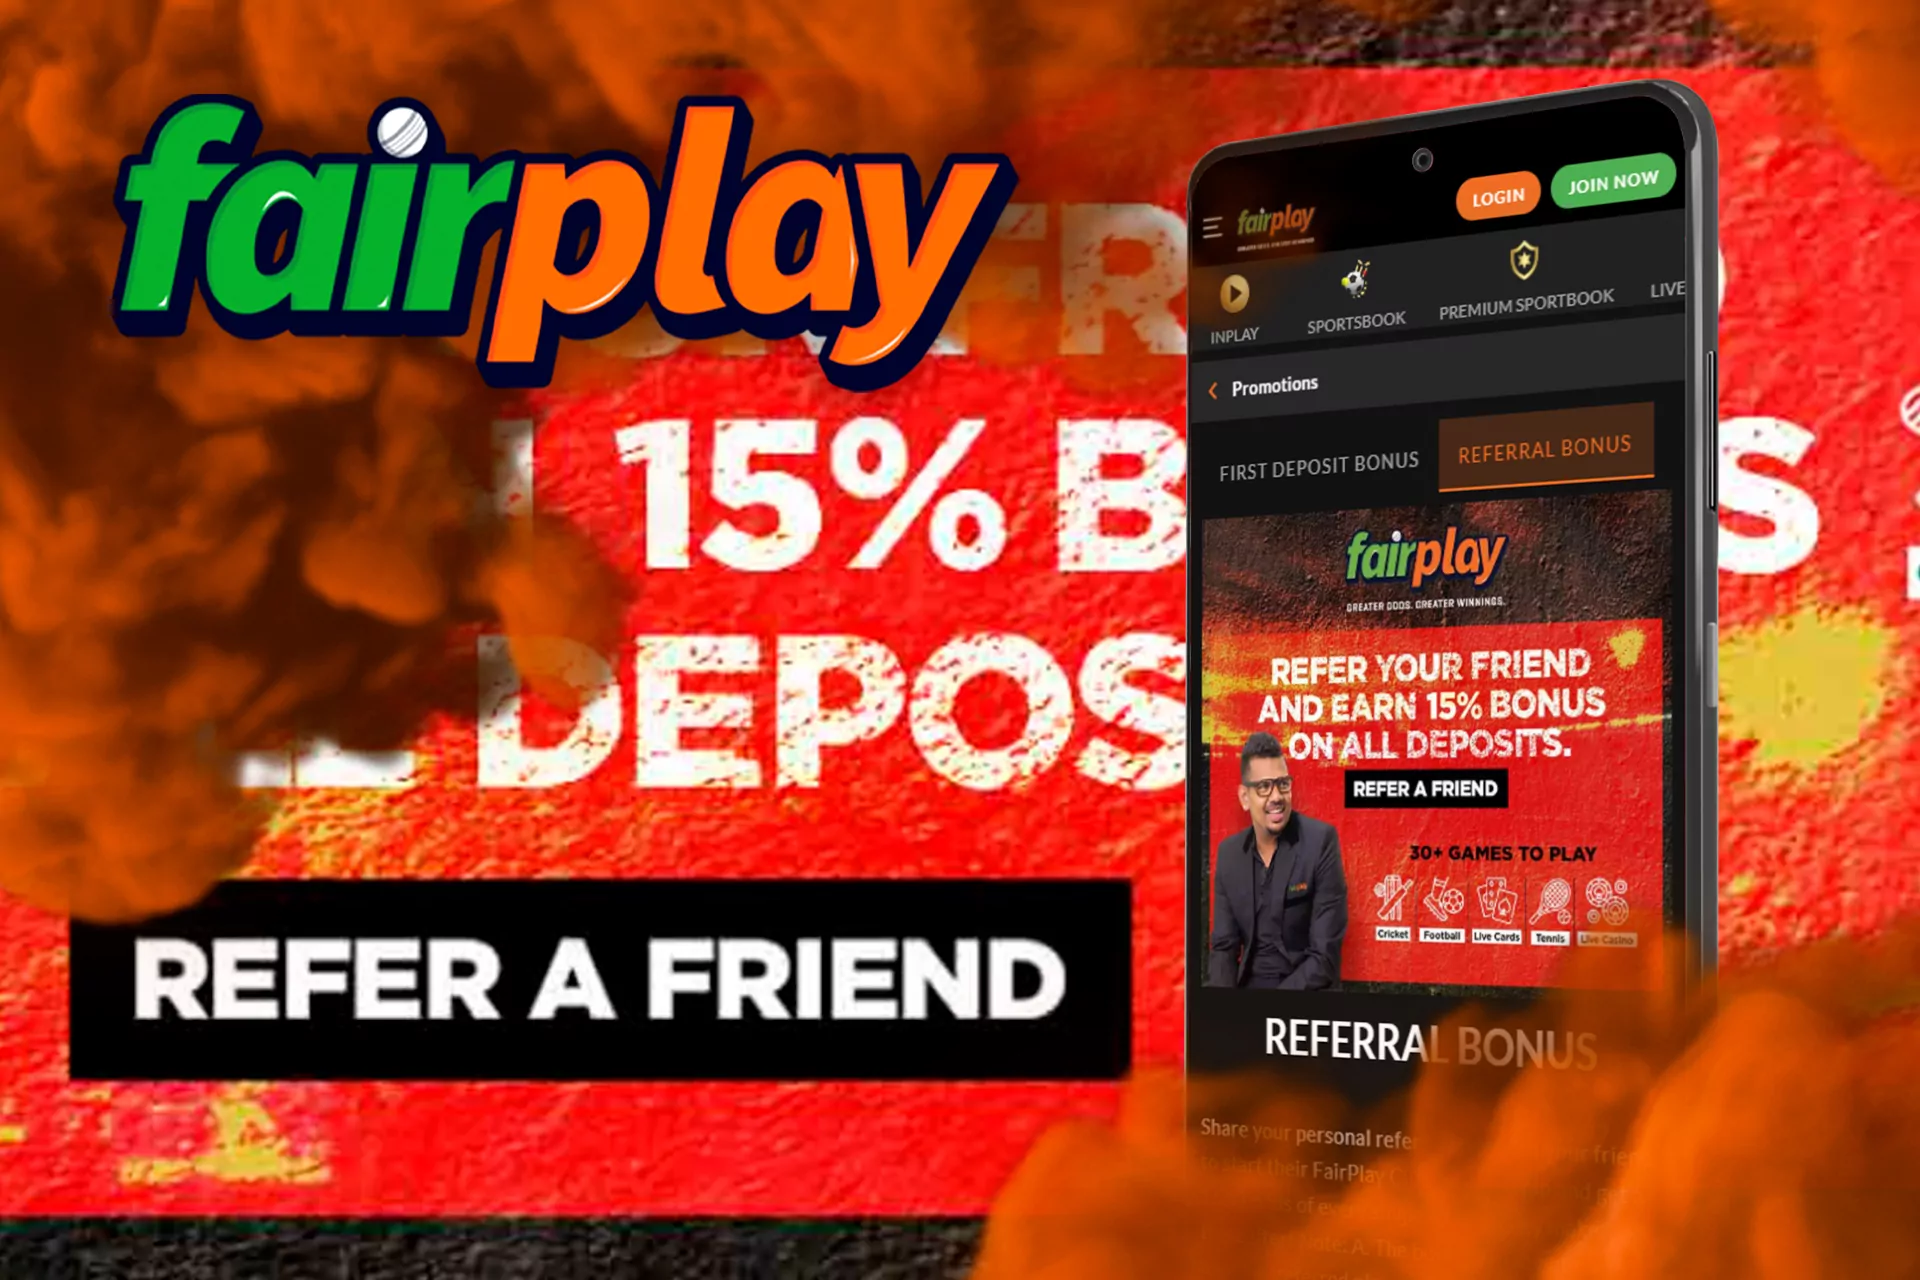 Invite friends to Fairplay and get a bonus in the app.